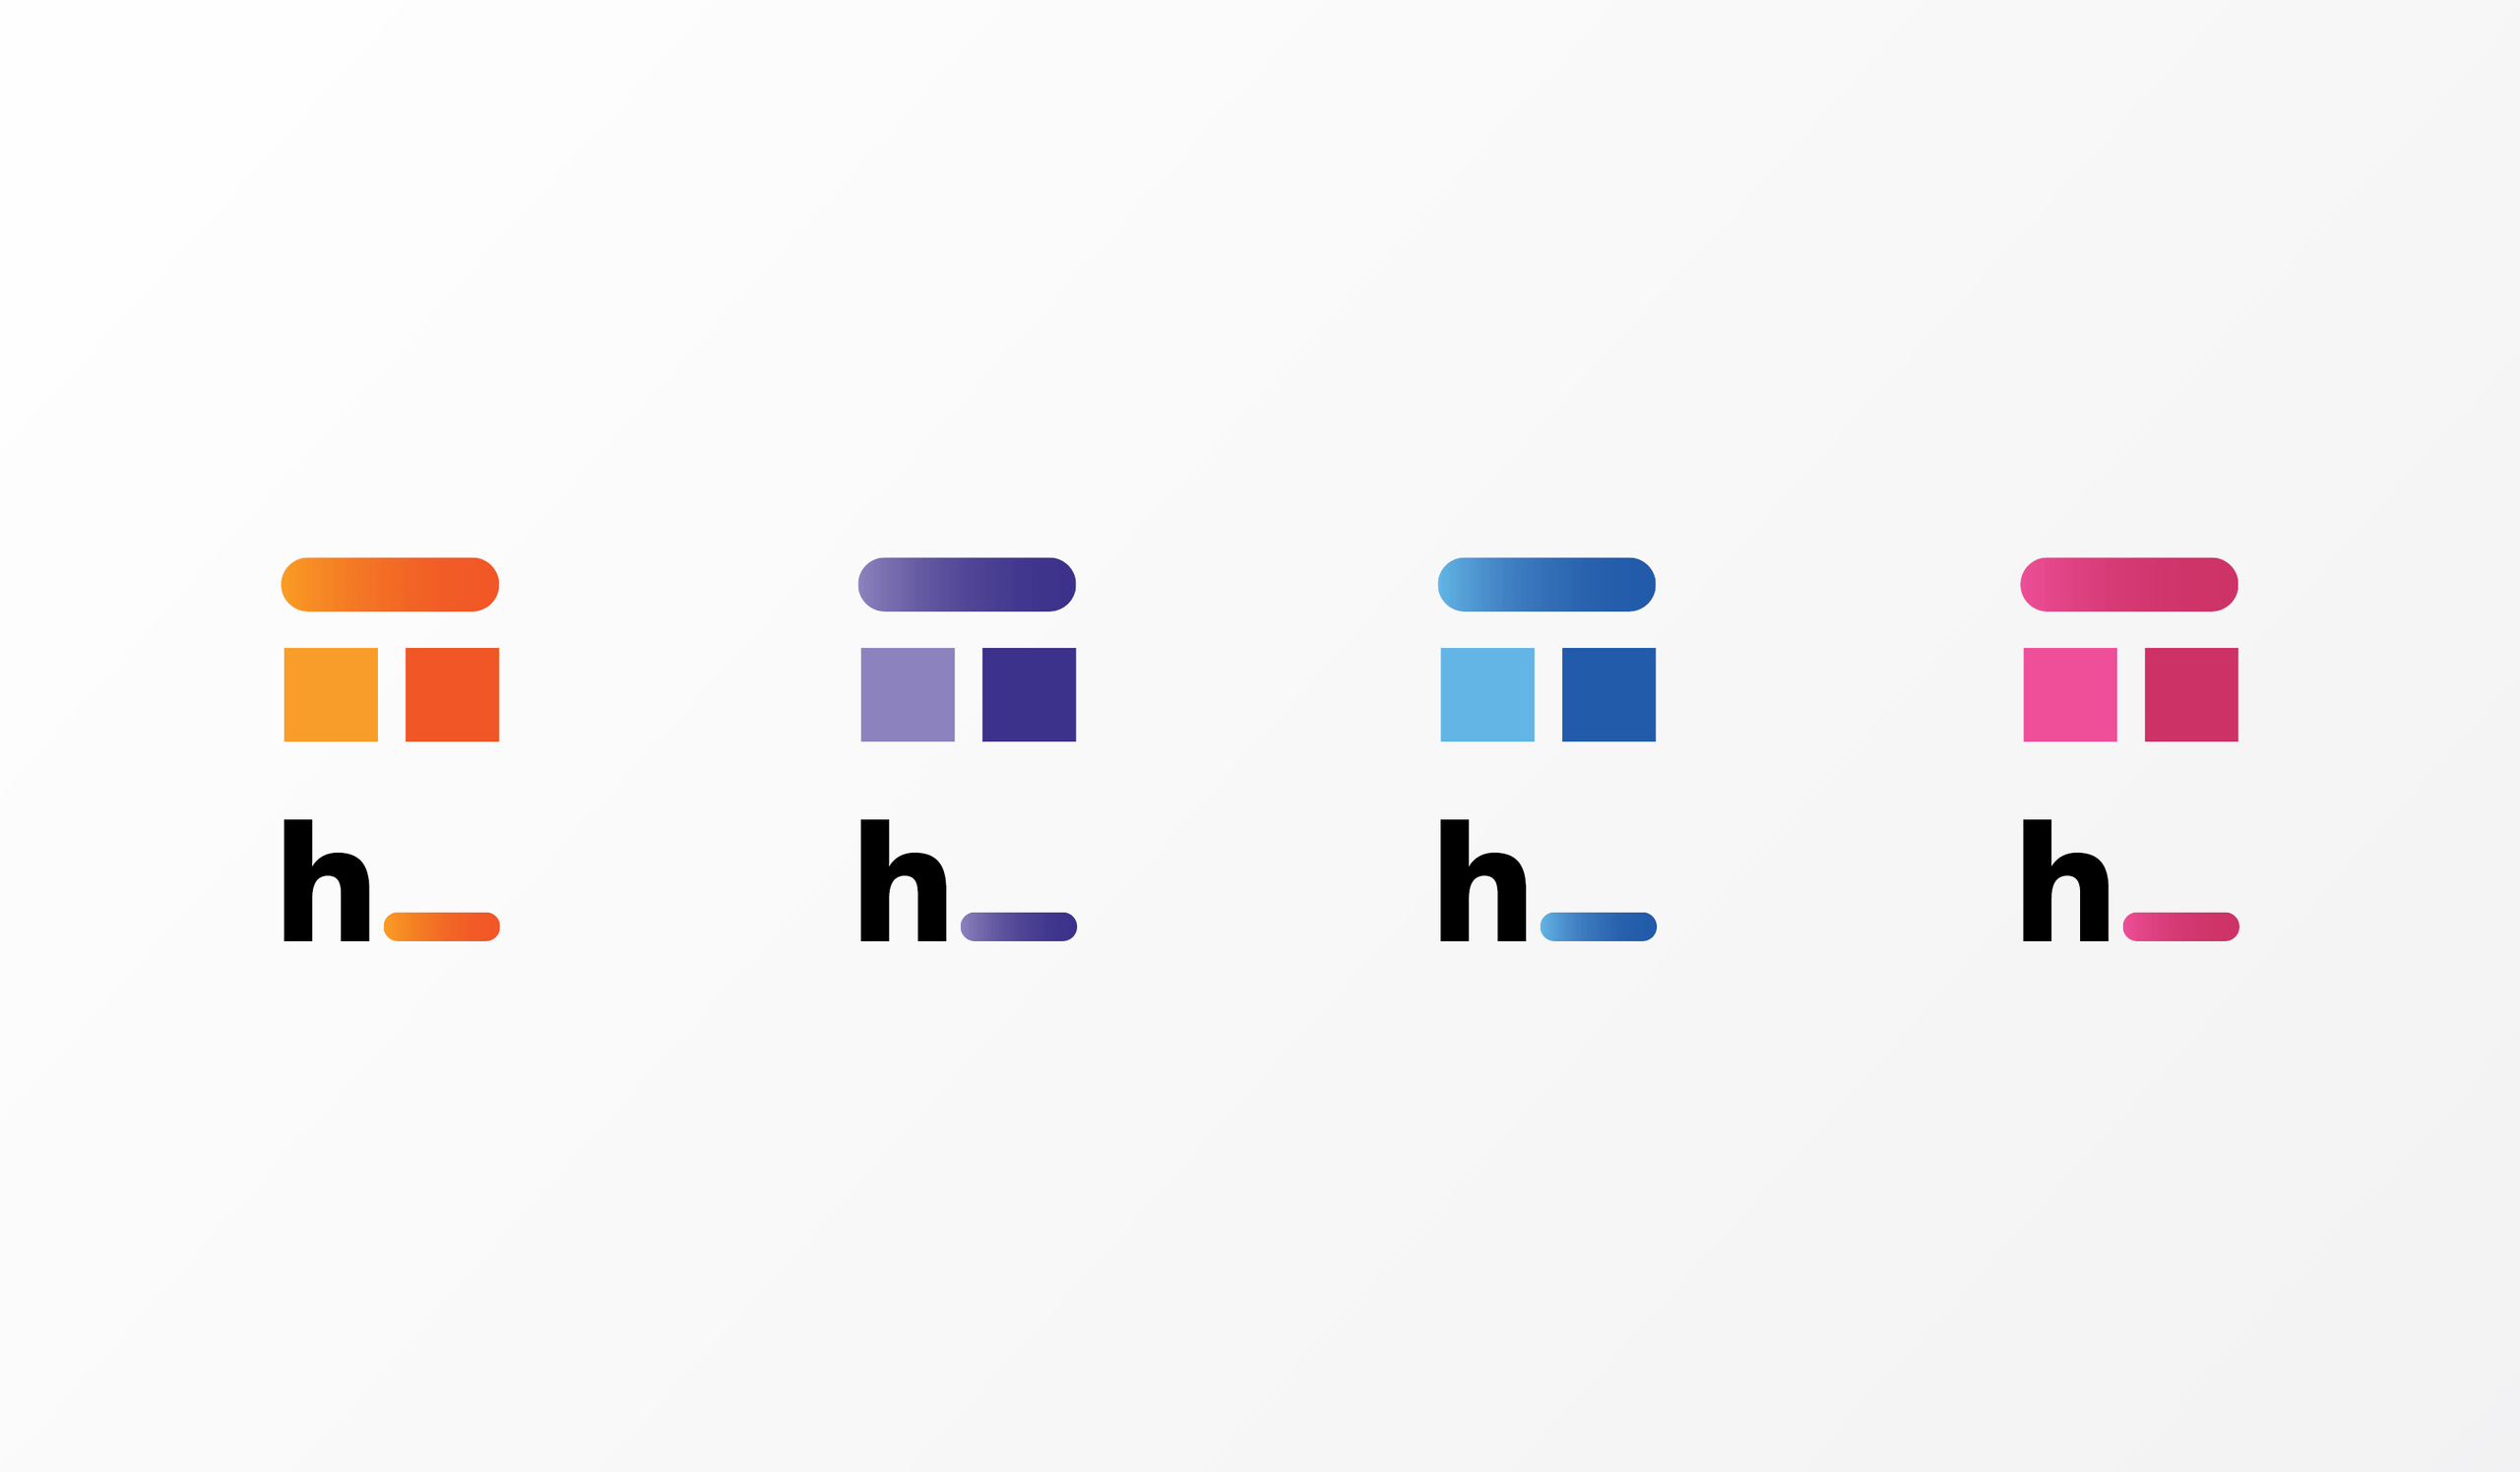 colour palettes showing the Human Space shortened logo (h_) in shades of orange, purple, blue, and pink